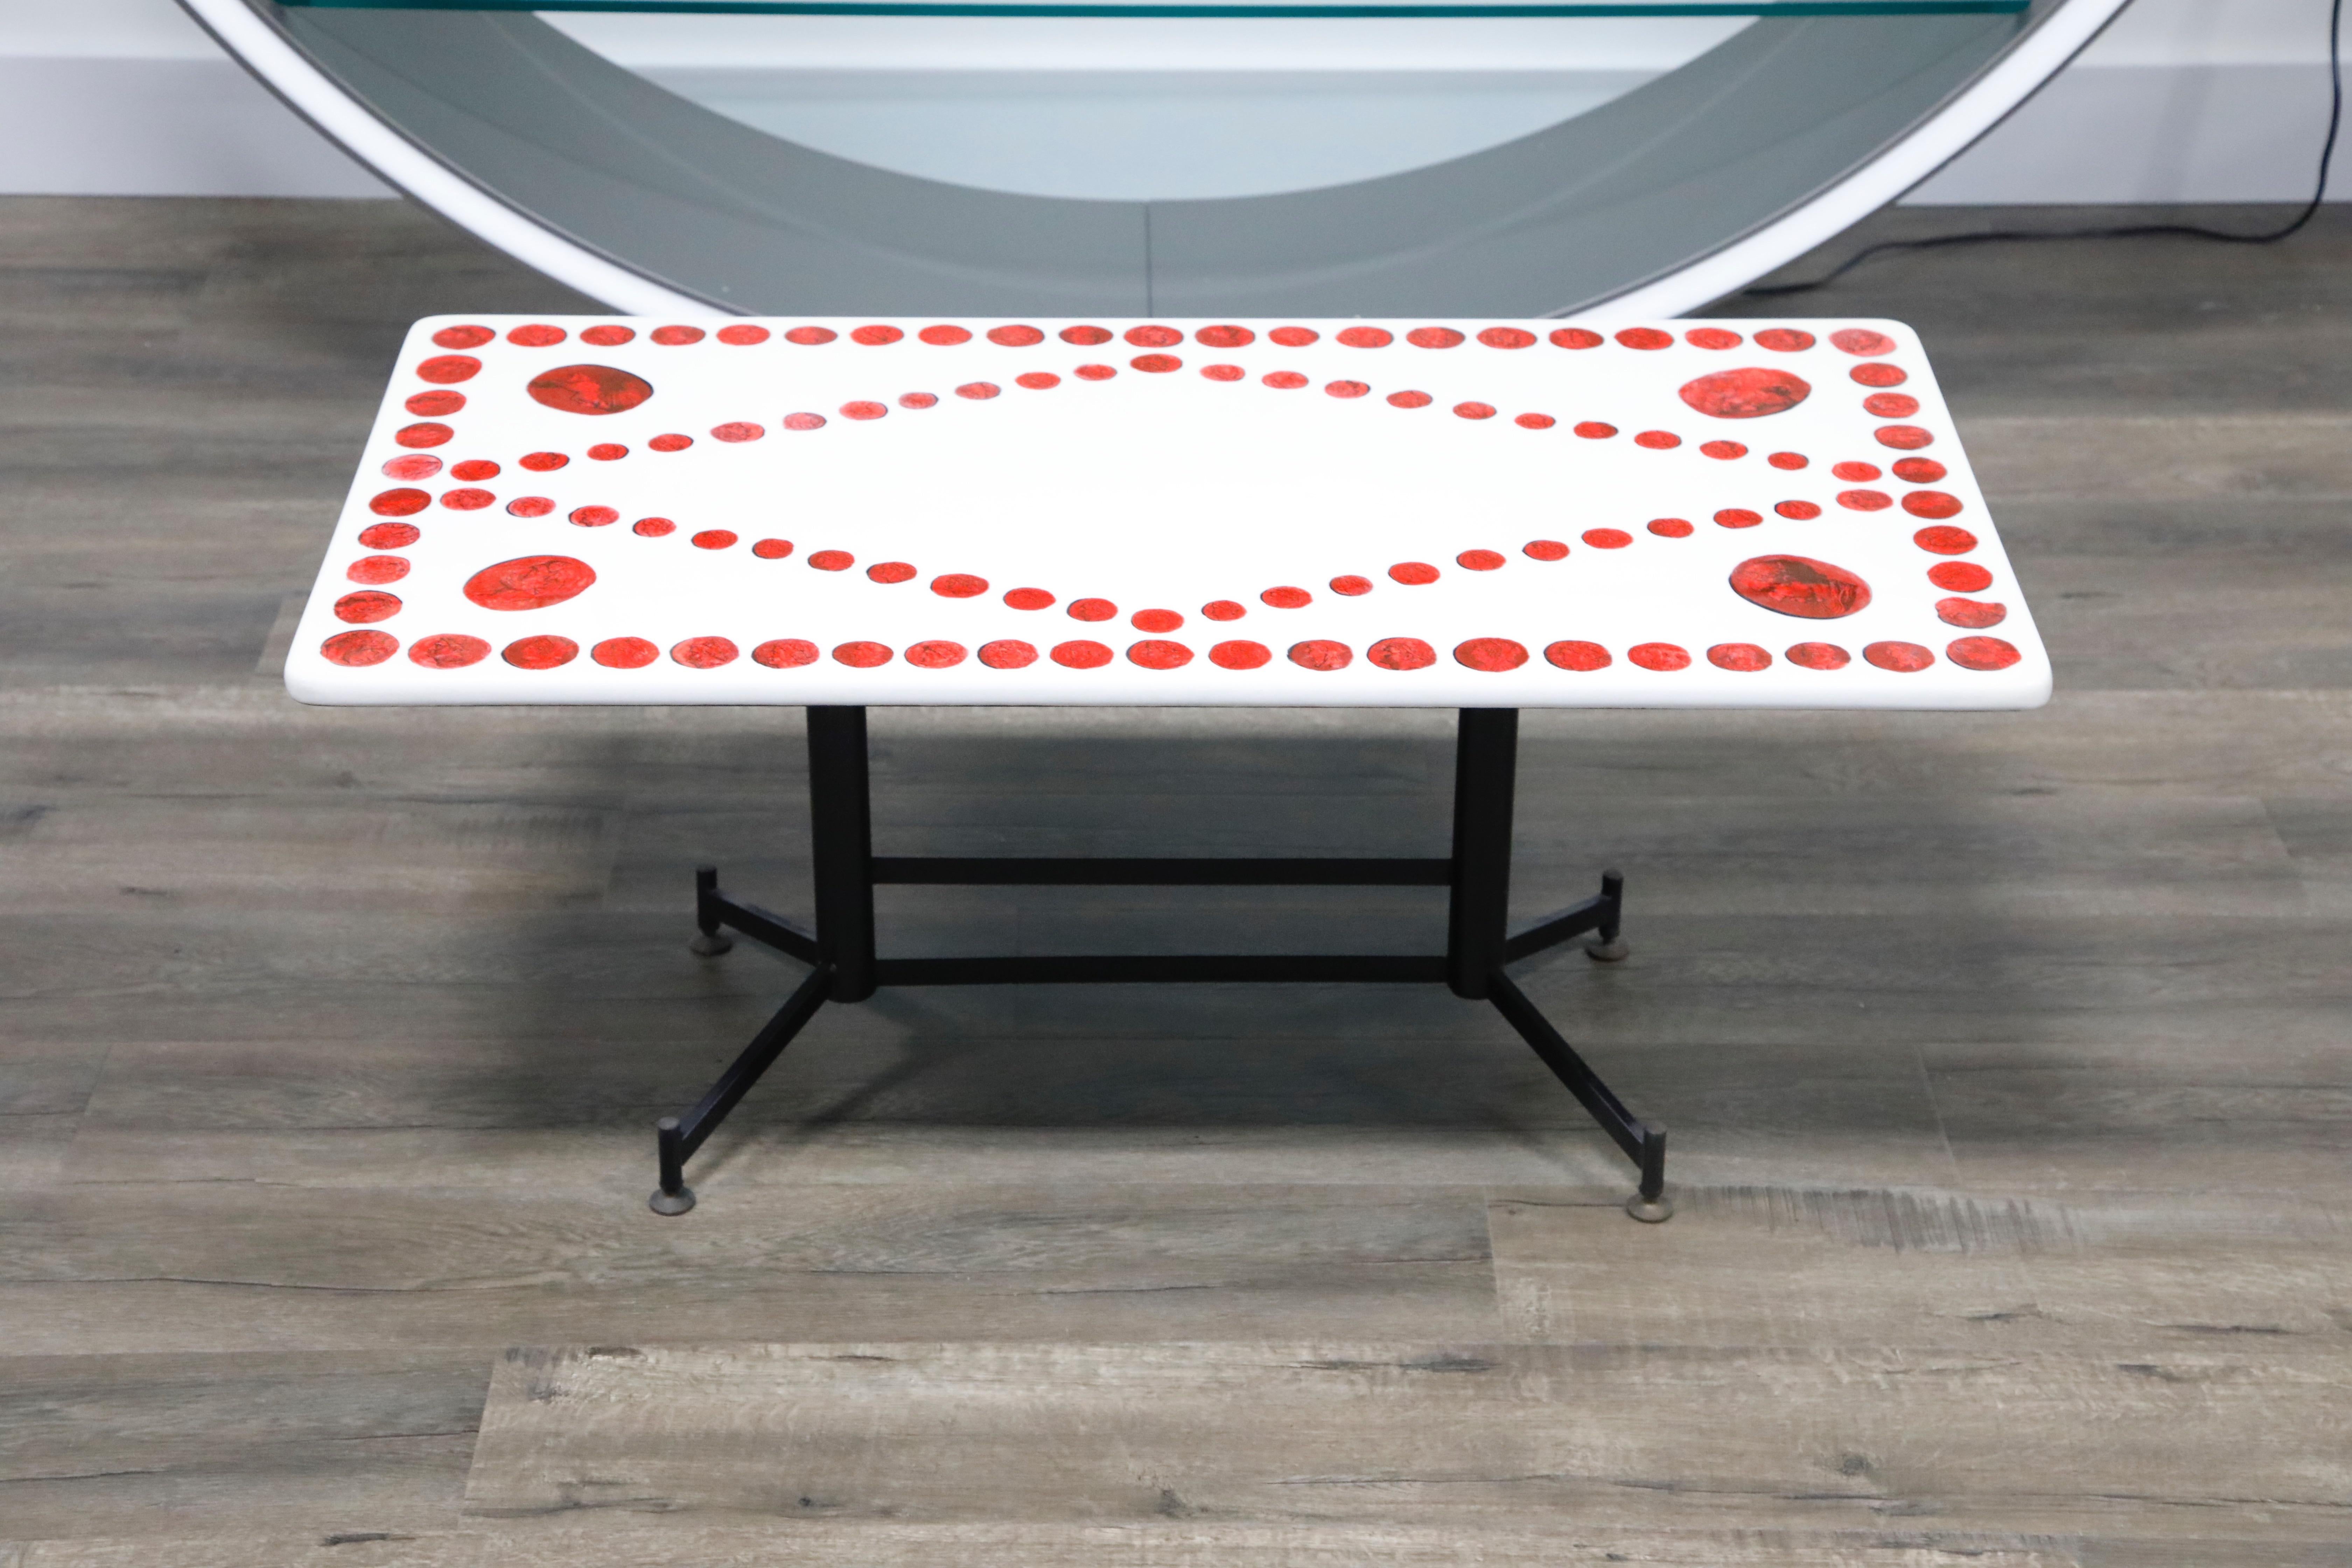 Mid-Century Modern 'Cammei' Coffee Table by Piero Fornasetti, c. 1960s Italy, Signed 